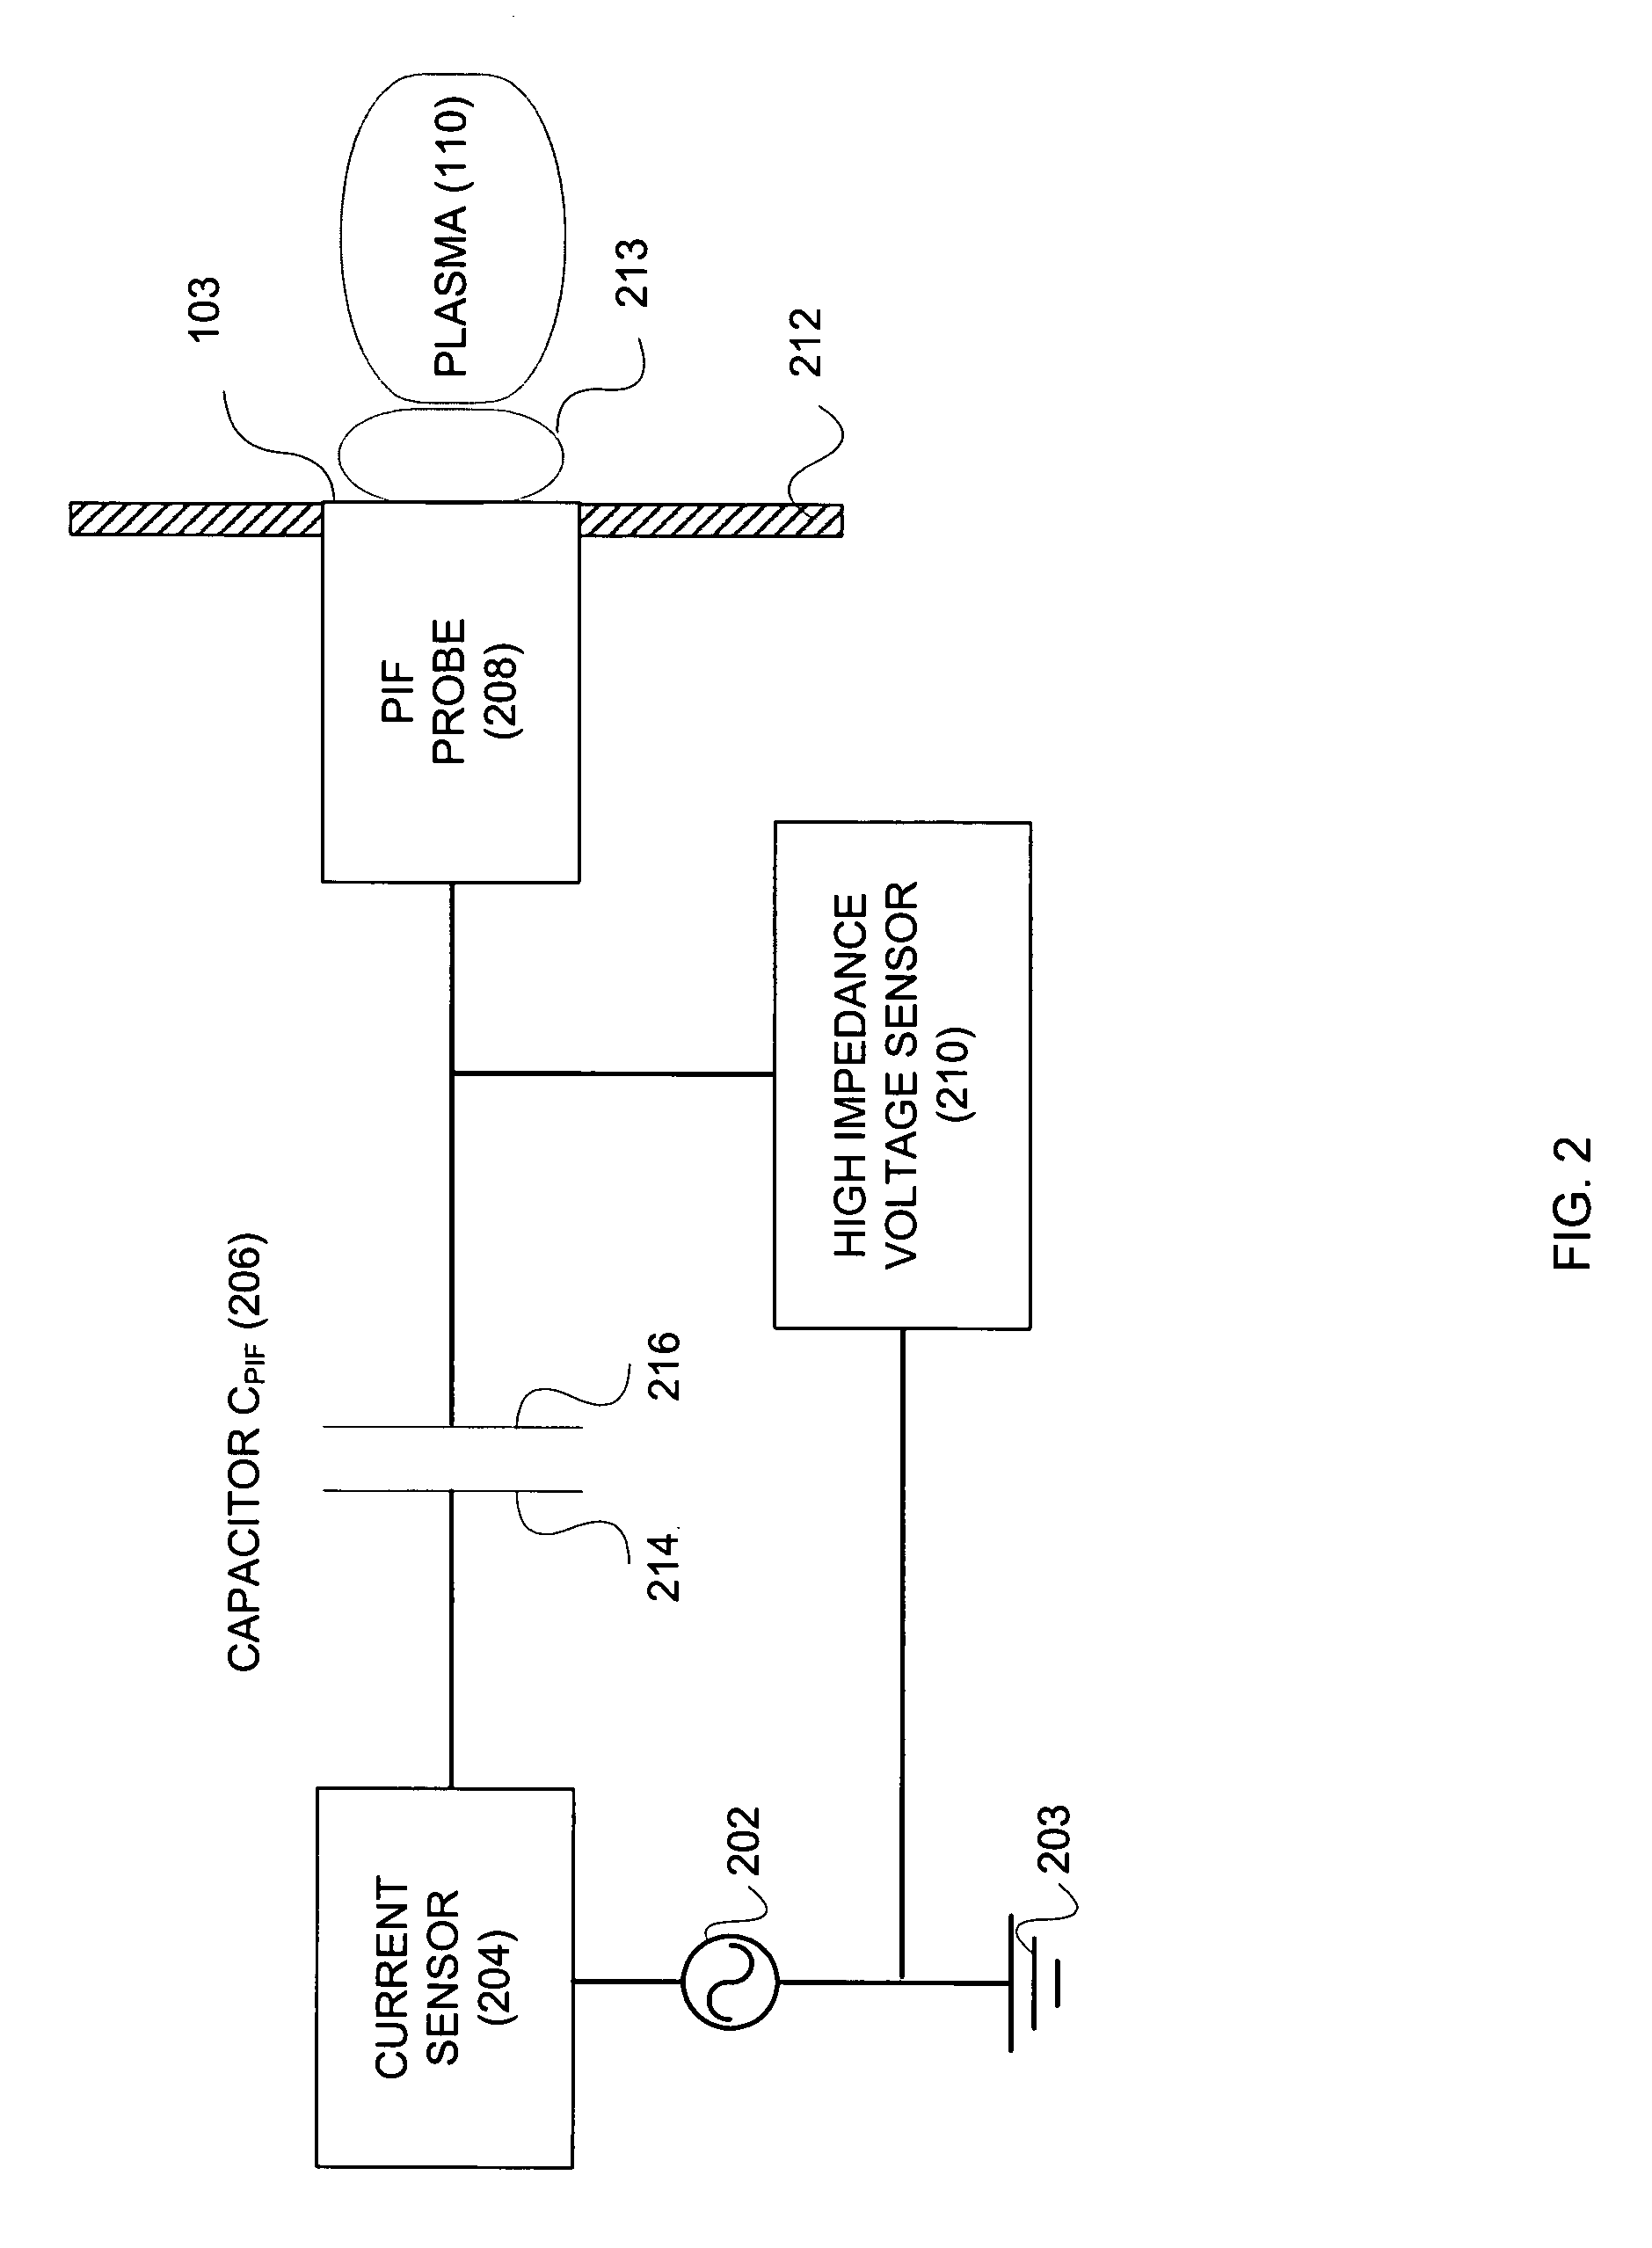 Controlling plasma processing using parameters derived through the use of a planar ion flux probing arrangement